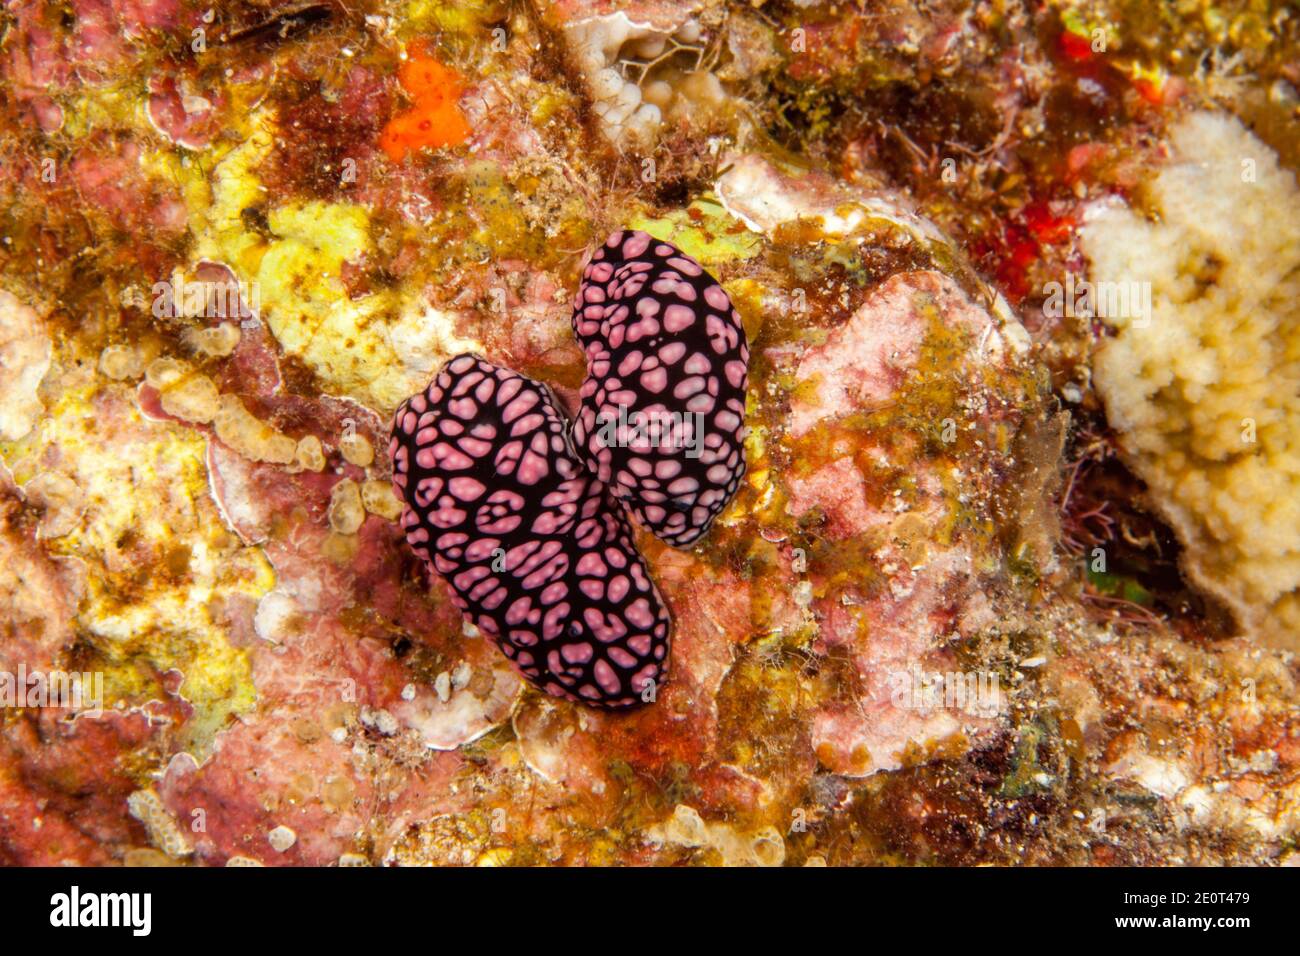 These two pustulose phylllidia nudibranchs, Phyllidiella pustulosa, are mating, Hawaii. Stock Photo